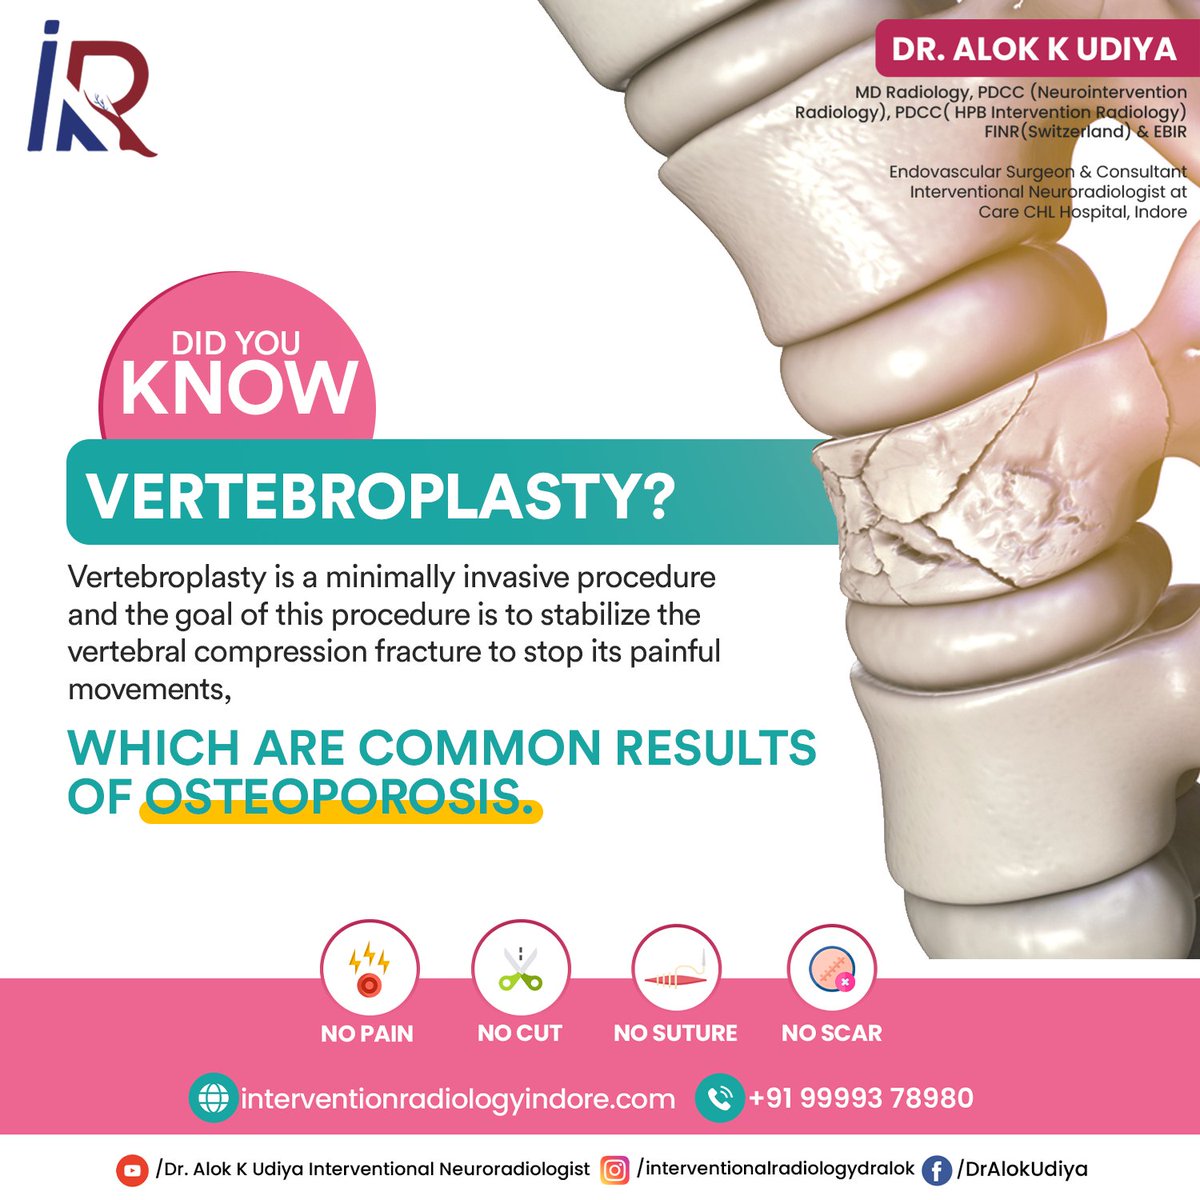 Vertebroplasty is often an outpatient procedure used to treat painful compression fractures in the spine. For More Information Consult Dr. Alok Udiya  +91 99993 78980 #vertebroplasty #scoliosis #cervicalpain #interventionalradiologist #dralokudiya #painmanagement #backpain #spine